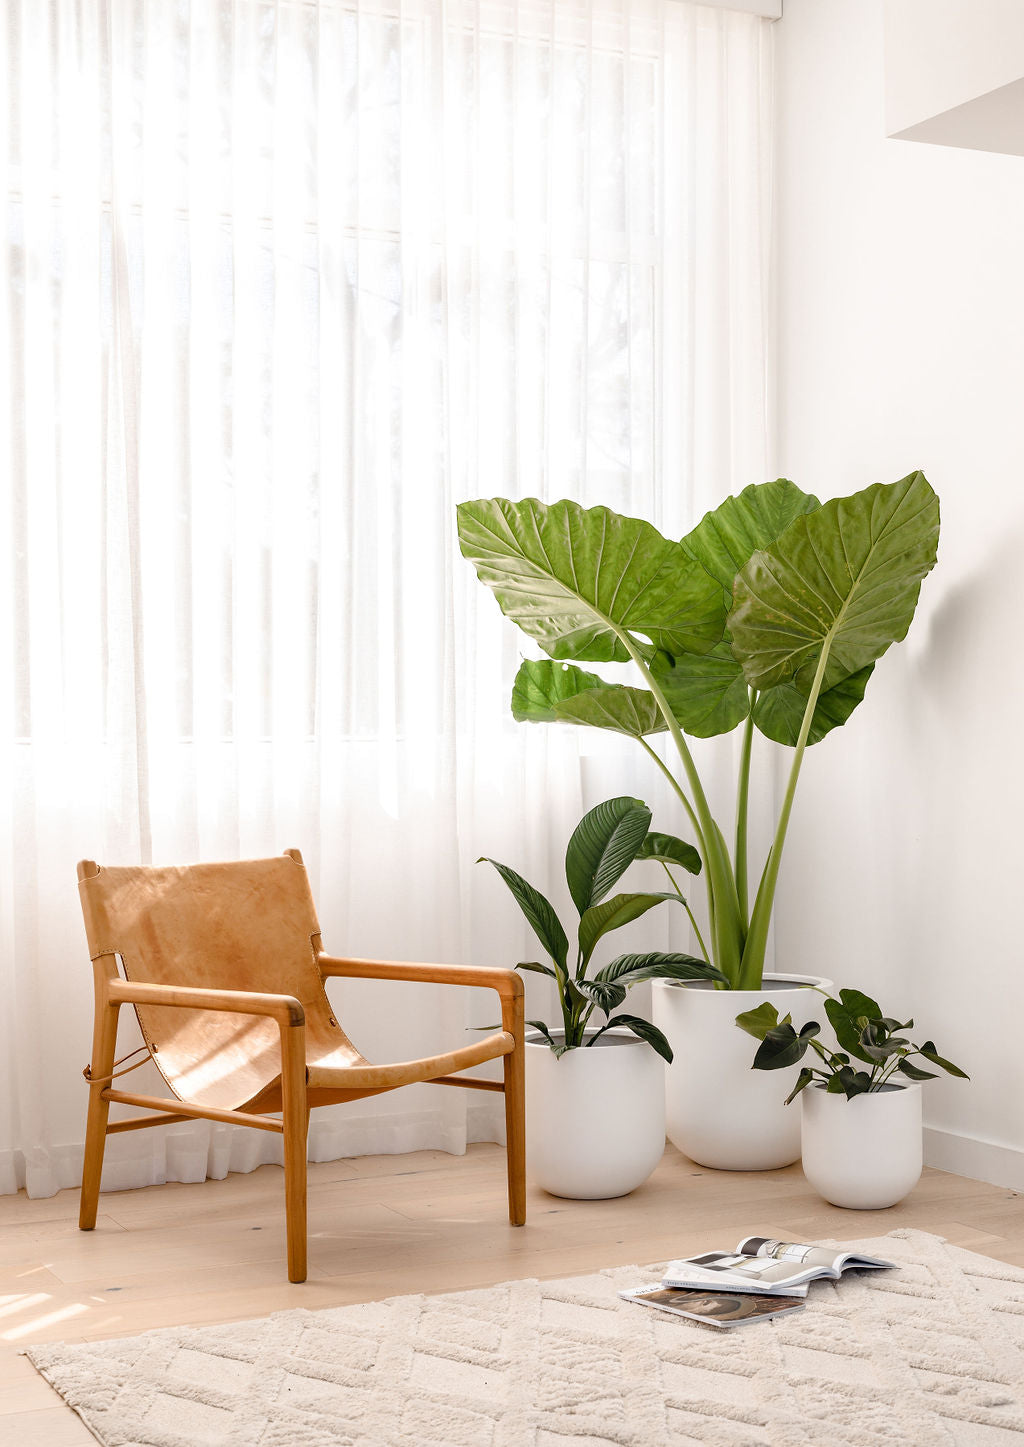 A white and tan colour-schemed room and white pot plants feature a large Elephant Ear Plant and a Philodendron plant.